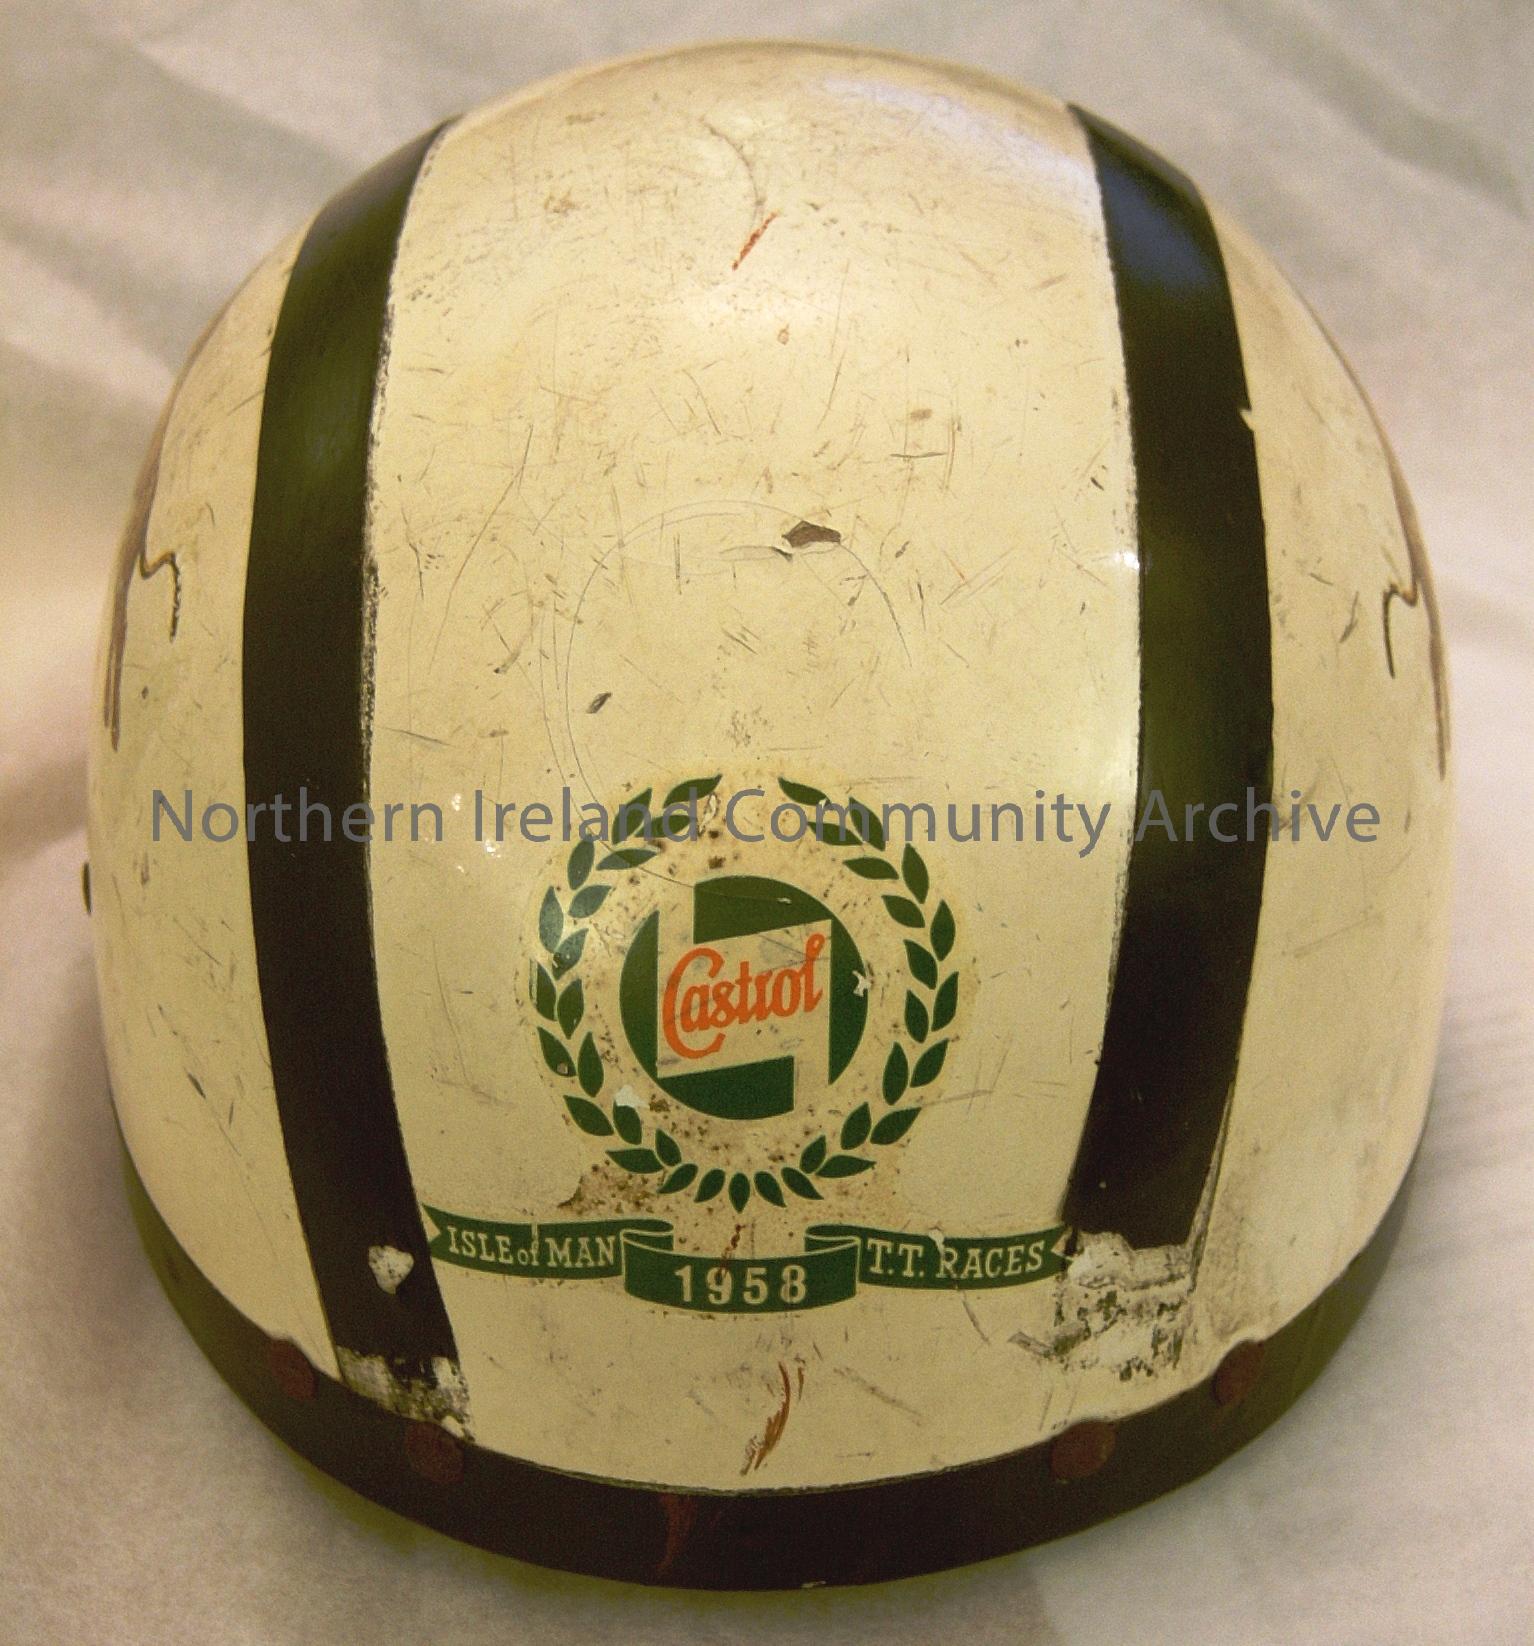 Isle of Man TT Races, 1958. White helmet with leather and material attachments inside. Labelled with BP Super Plus logo and Extra symbol of tiger (worn by the donor on motorcyles) (6679)